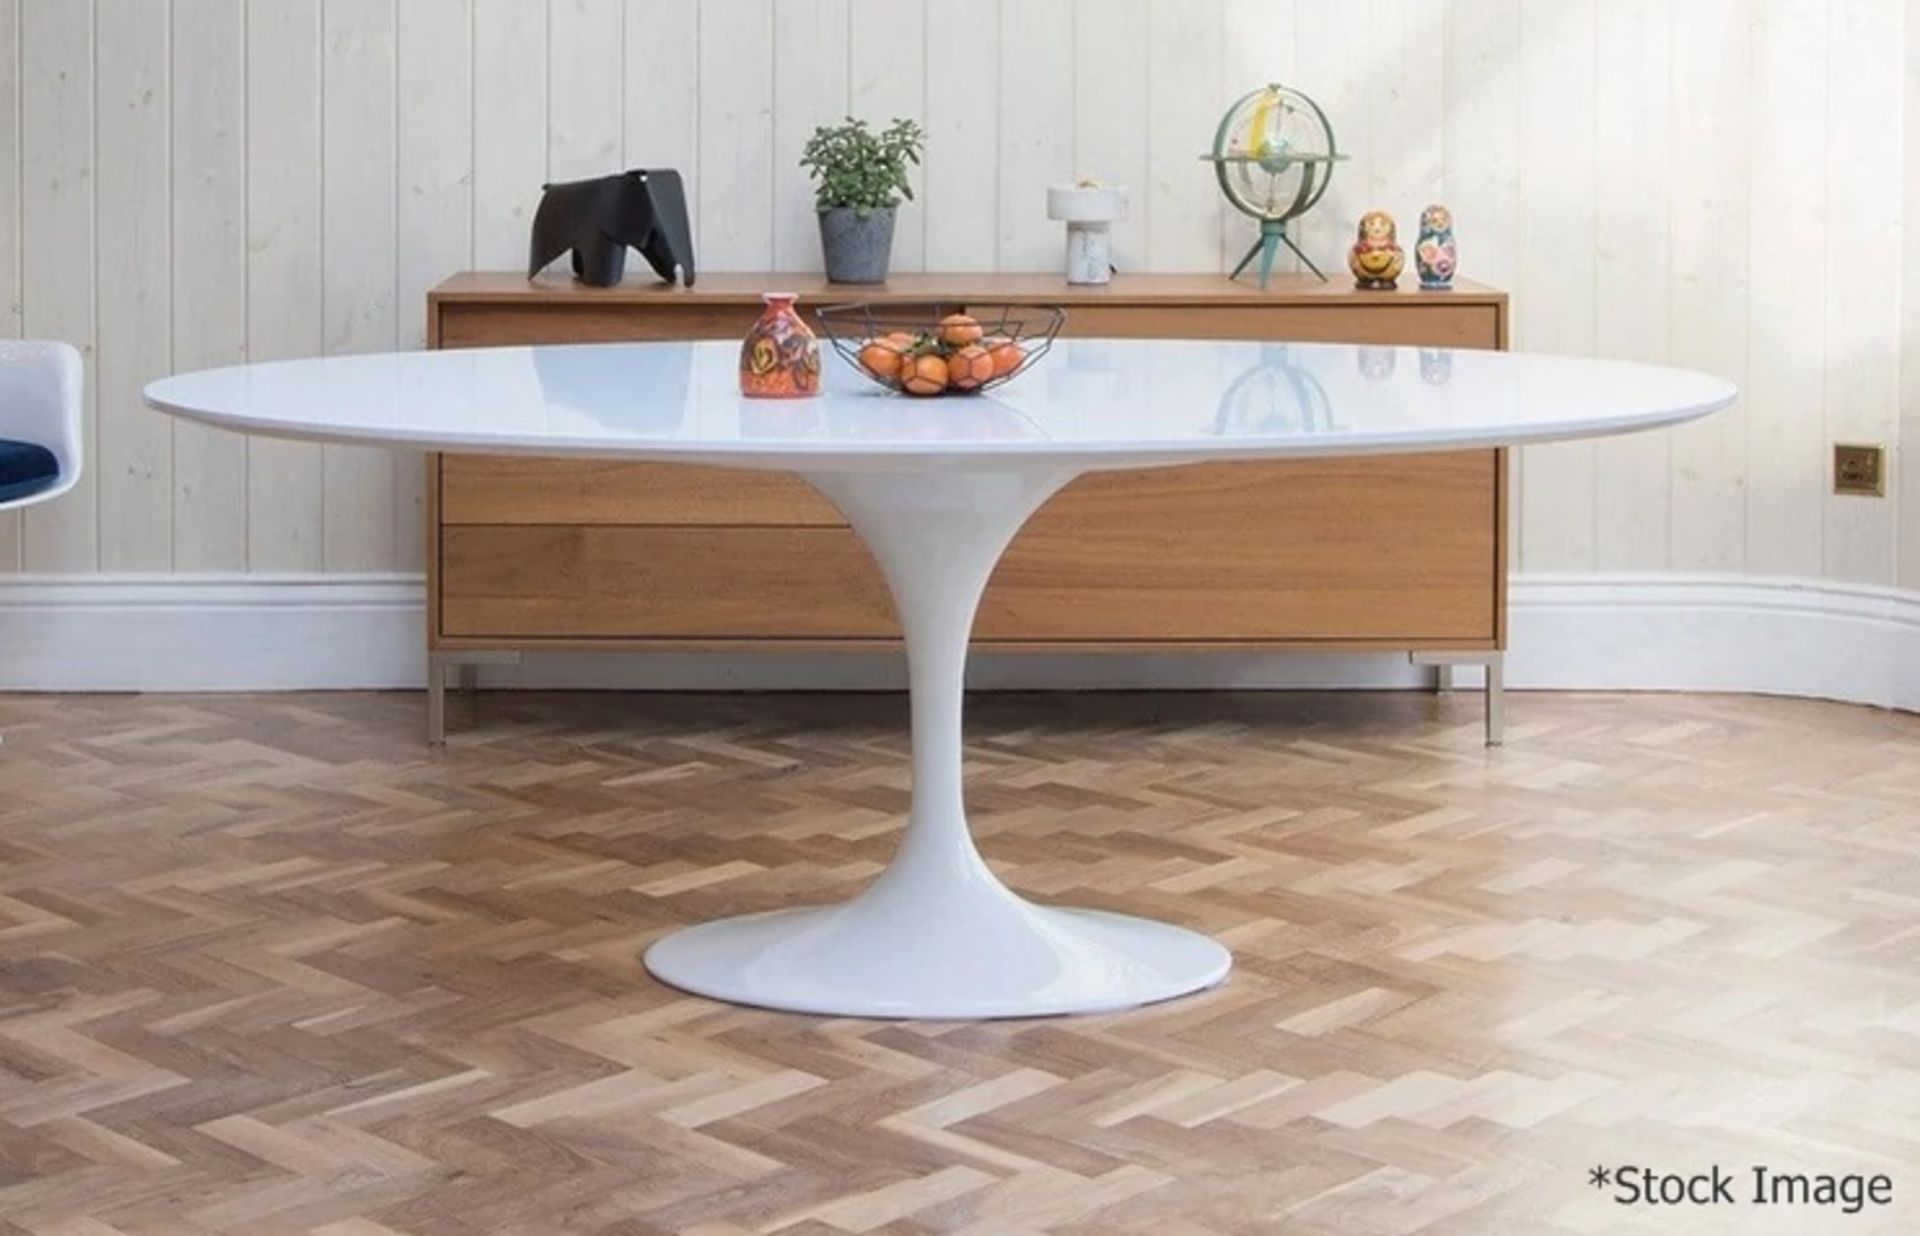 1 x Eero Saarinen Inspired Large Oval Dining Table In White - Dimensions: H74cm / W150 x D120cm